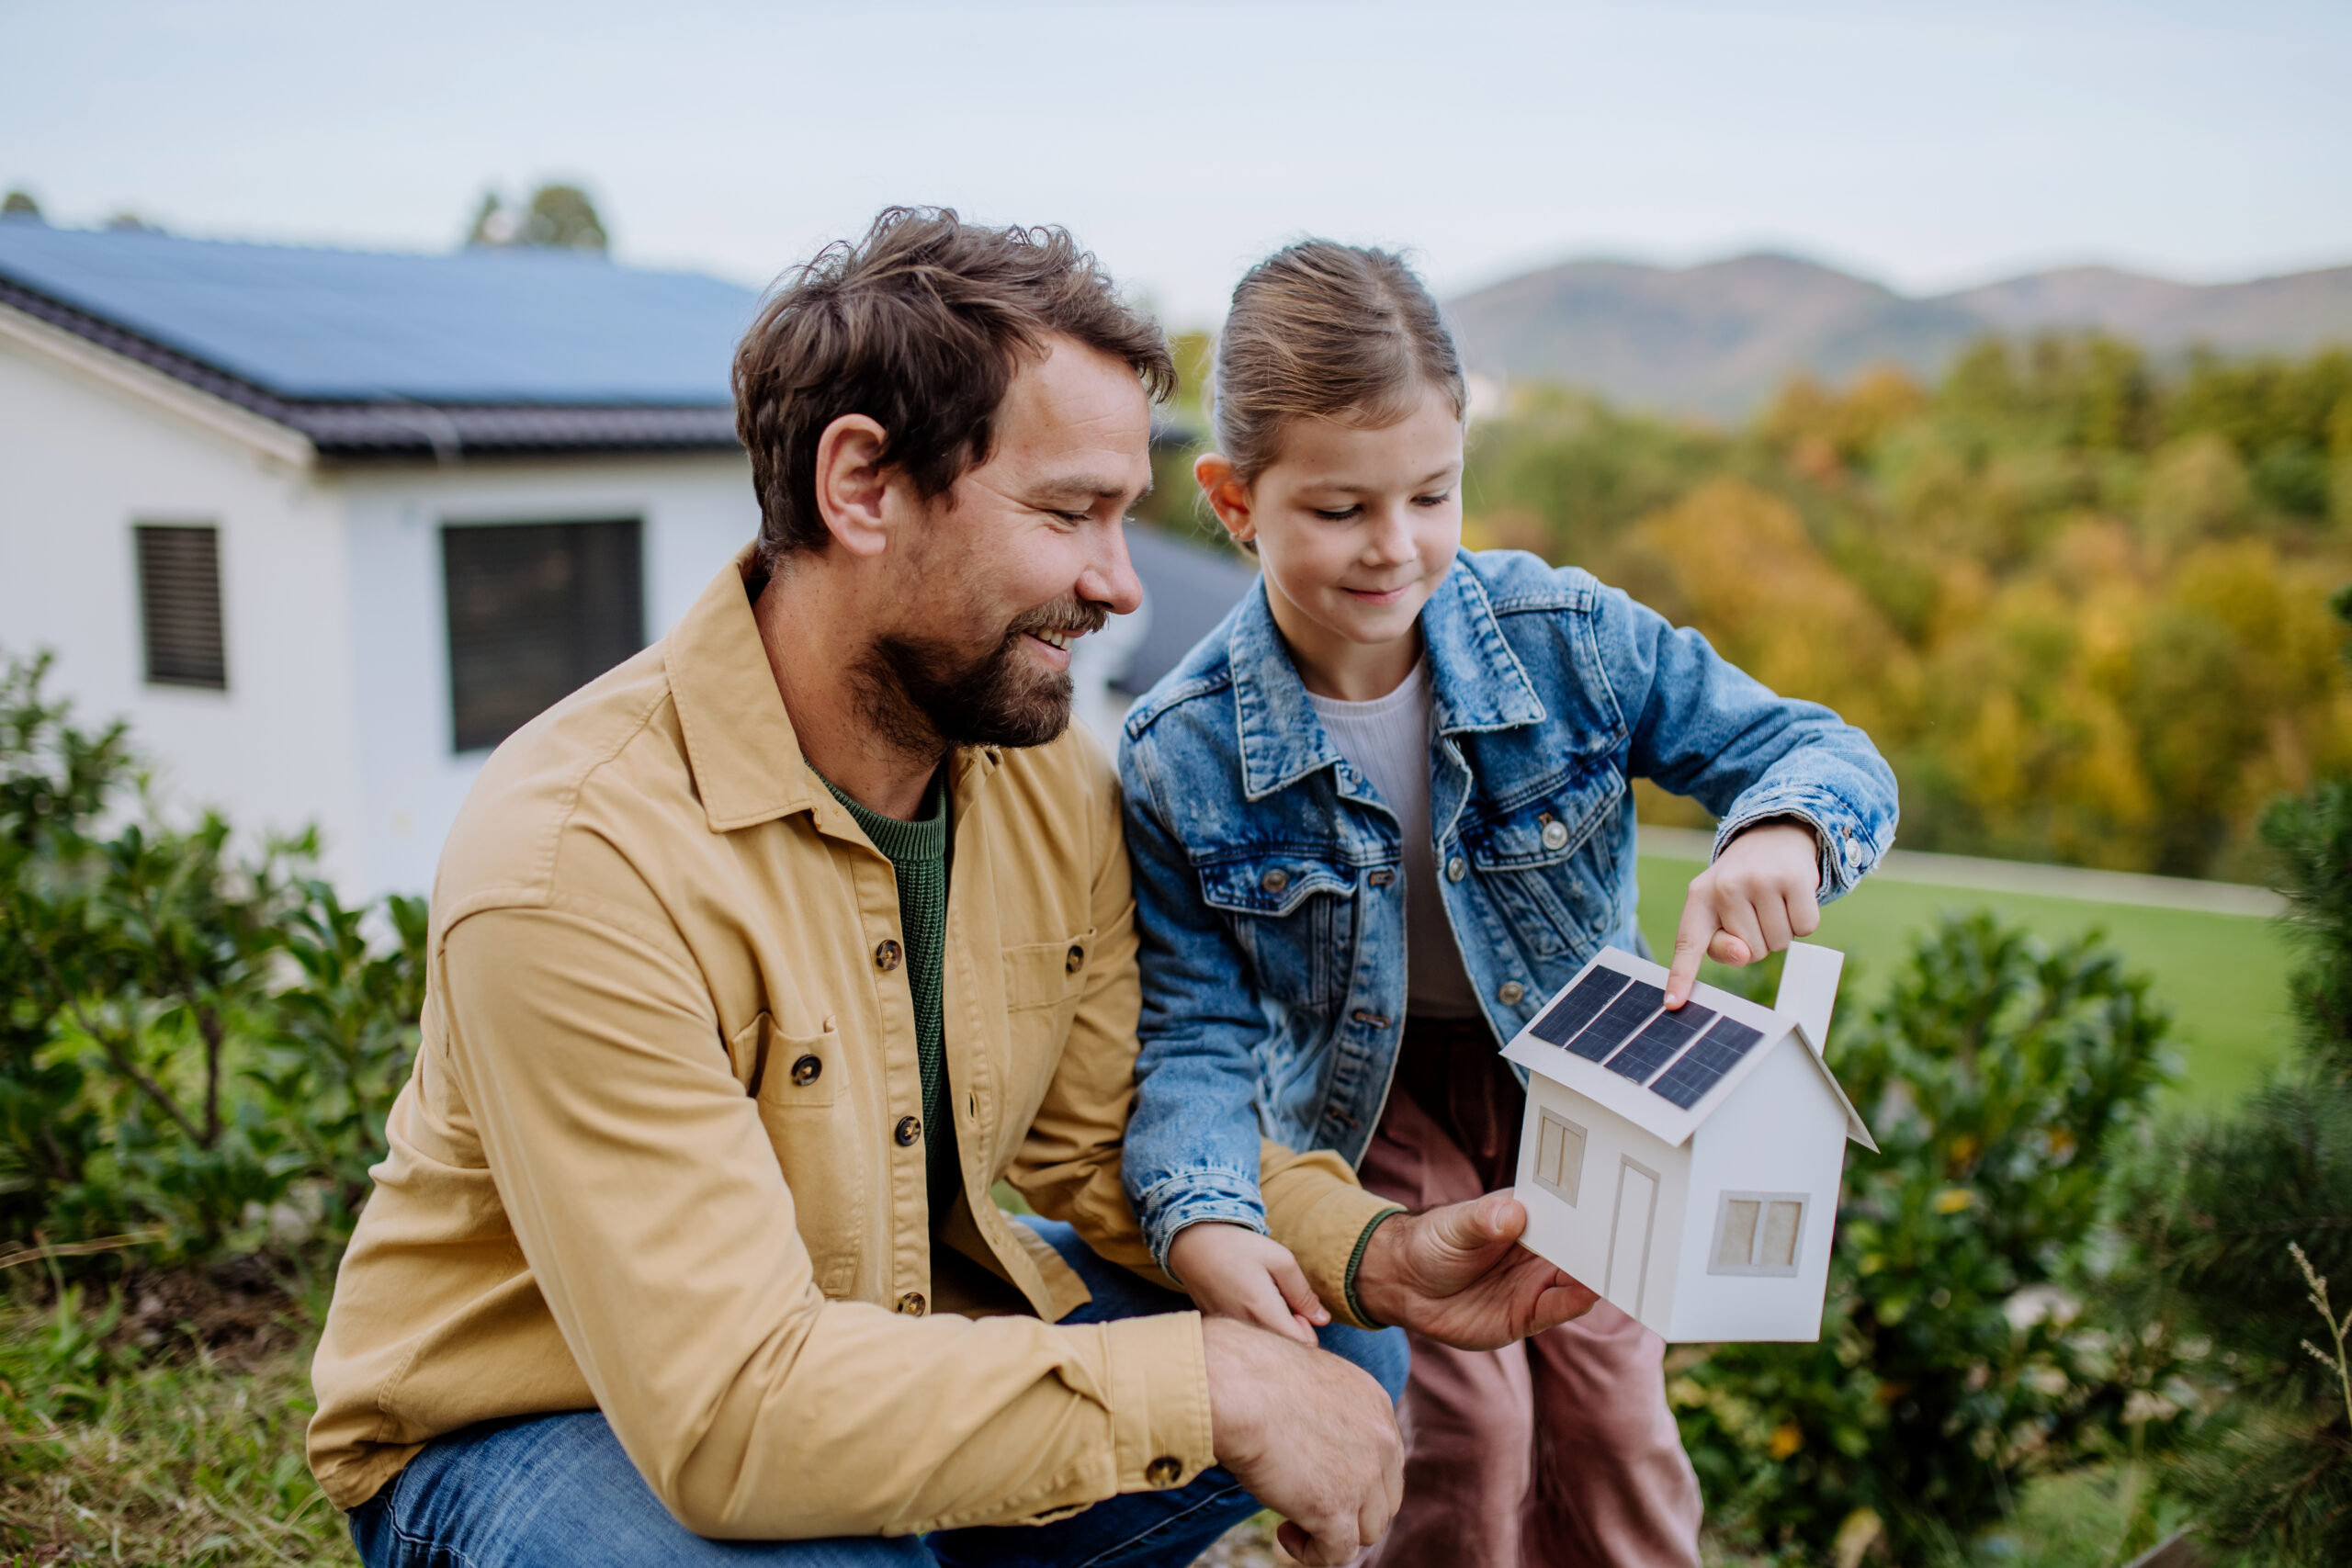 Little girl with her dad holding paper model of house with solar panels, explaining how it works.Alternative energy, saving resources and sustainable lifestyle concept